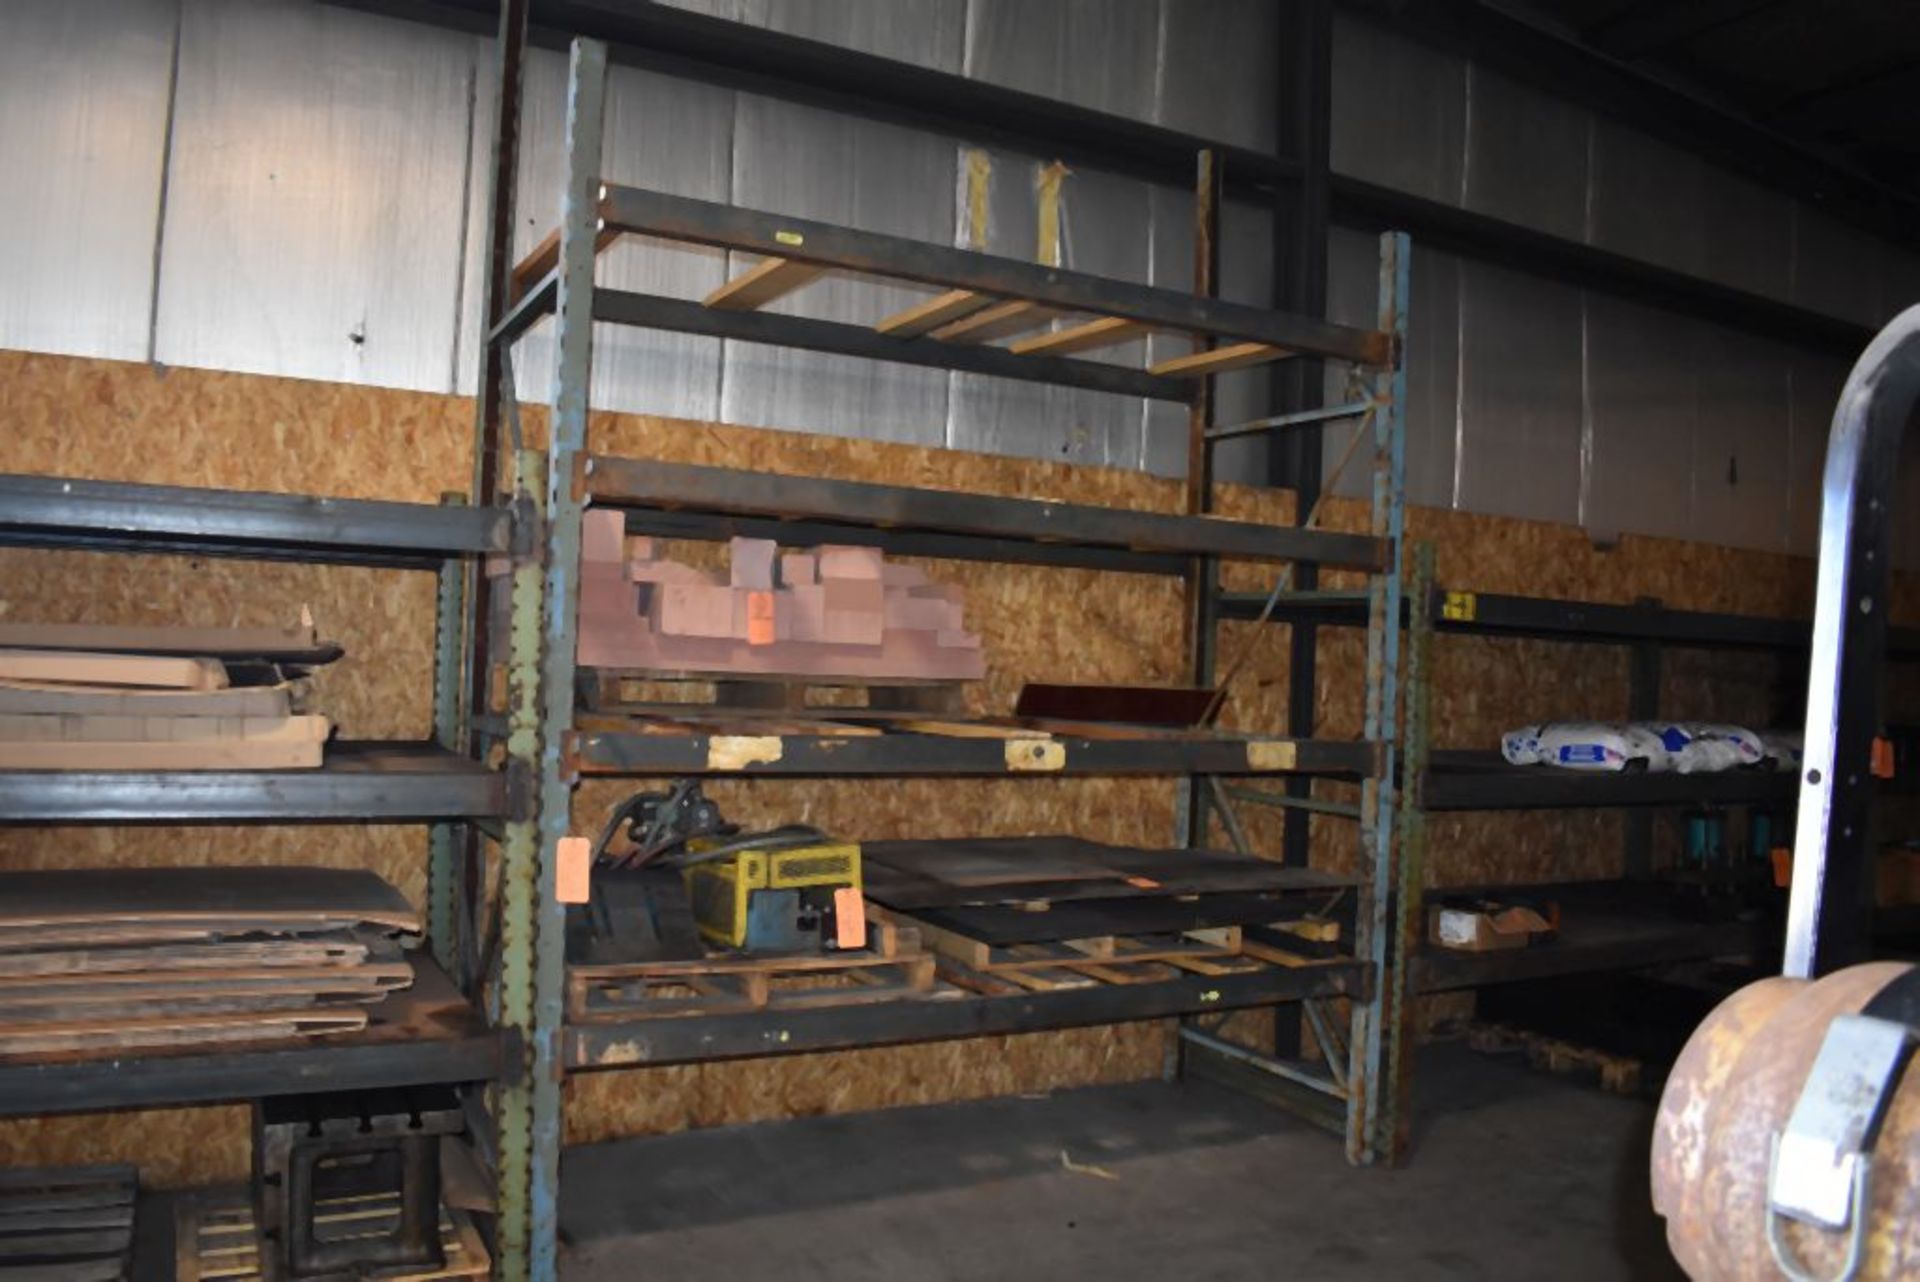 ONE SECTION OF BLUE PALLET RACKING WITH FOUR WOOD PLANK SHELVES, NO CONTENTS, 125"H x 112"W x 43"D